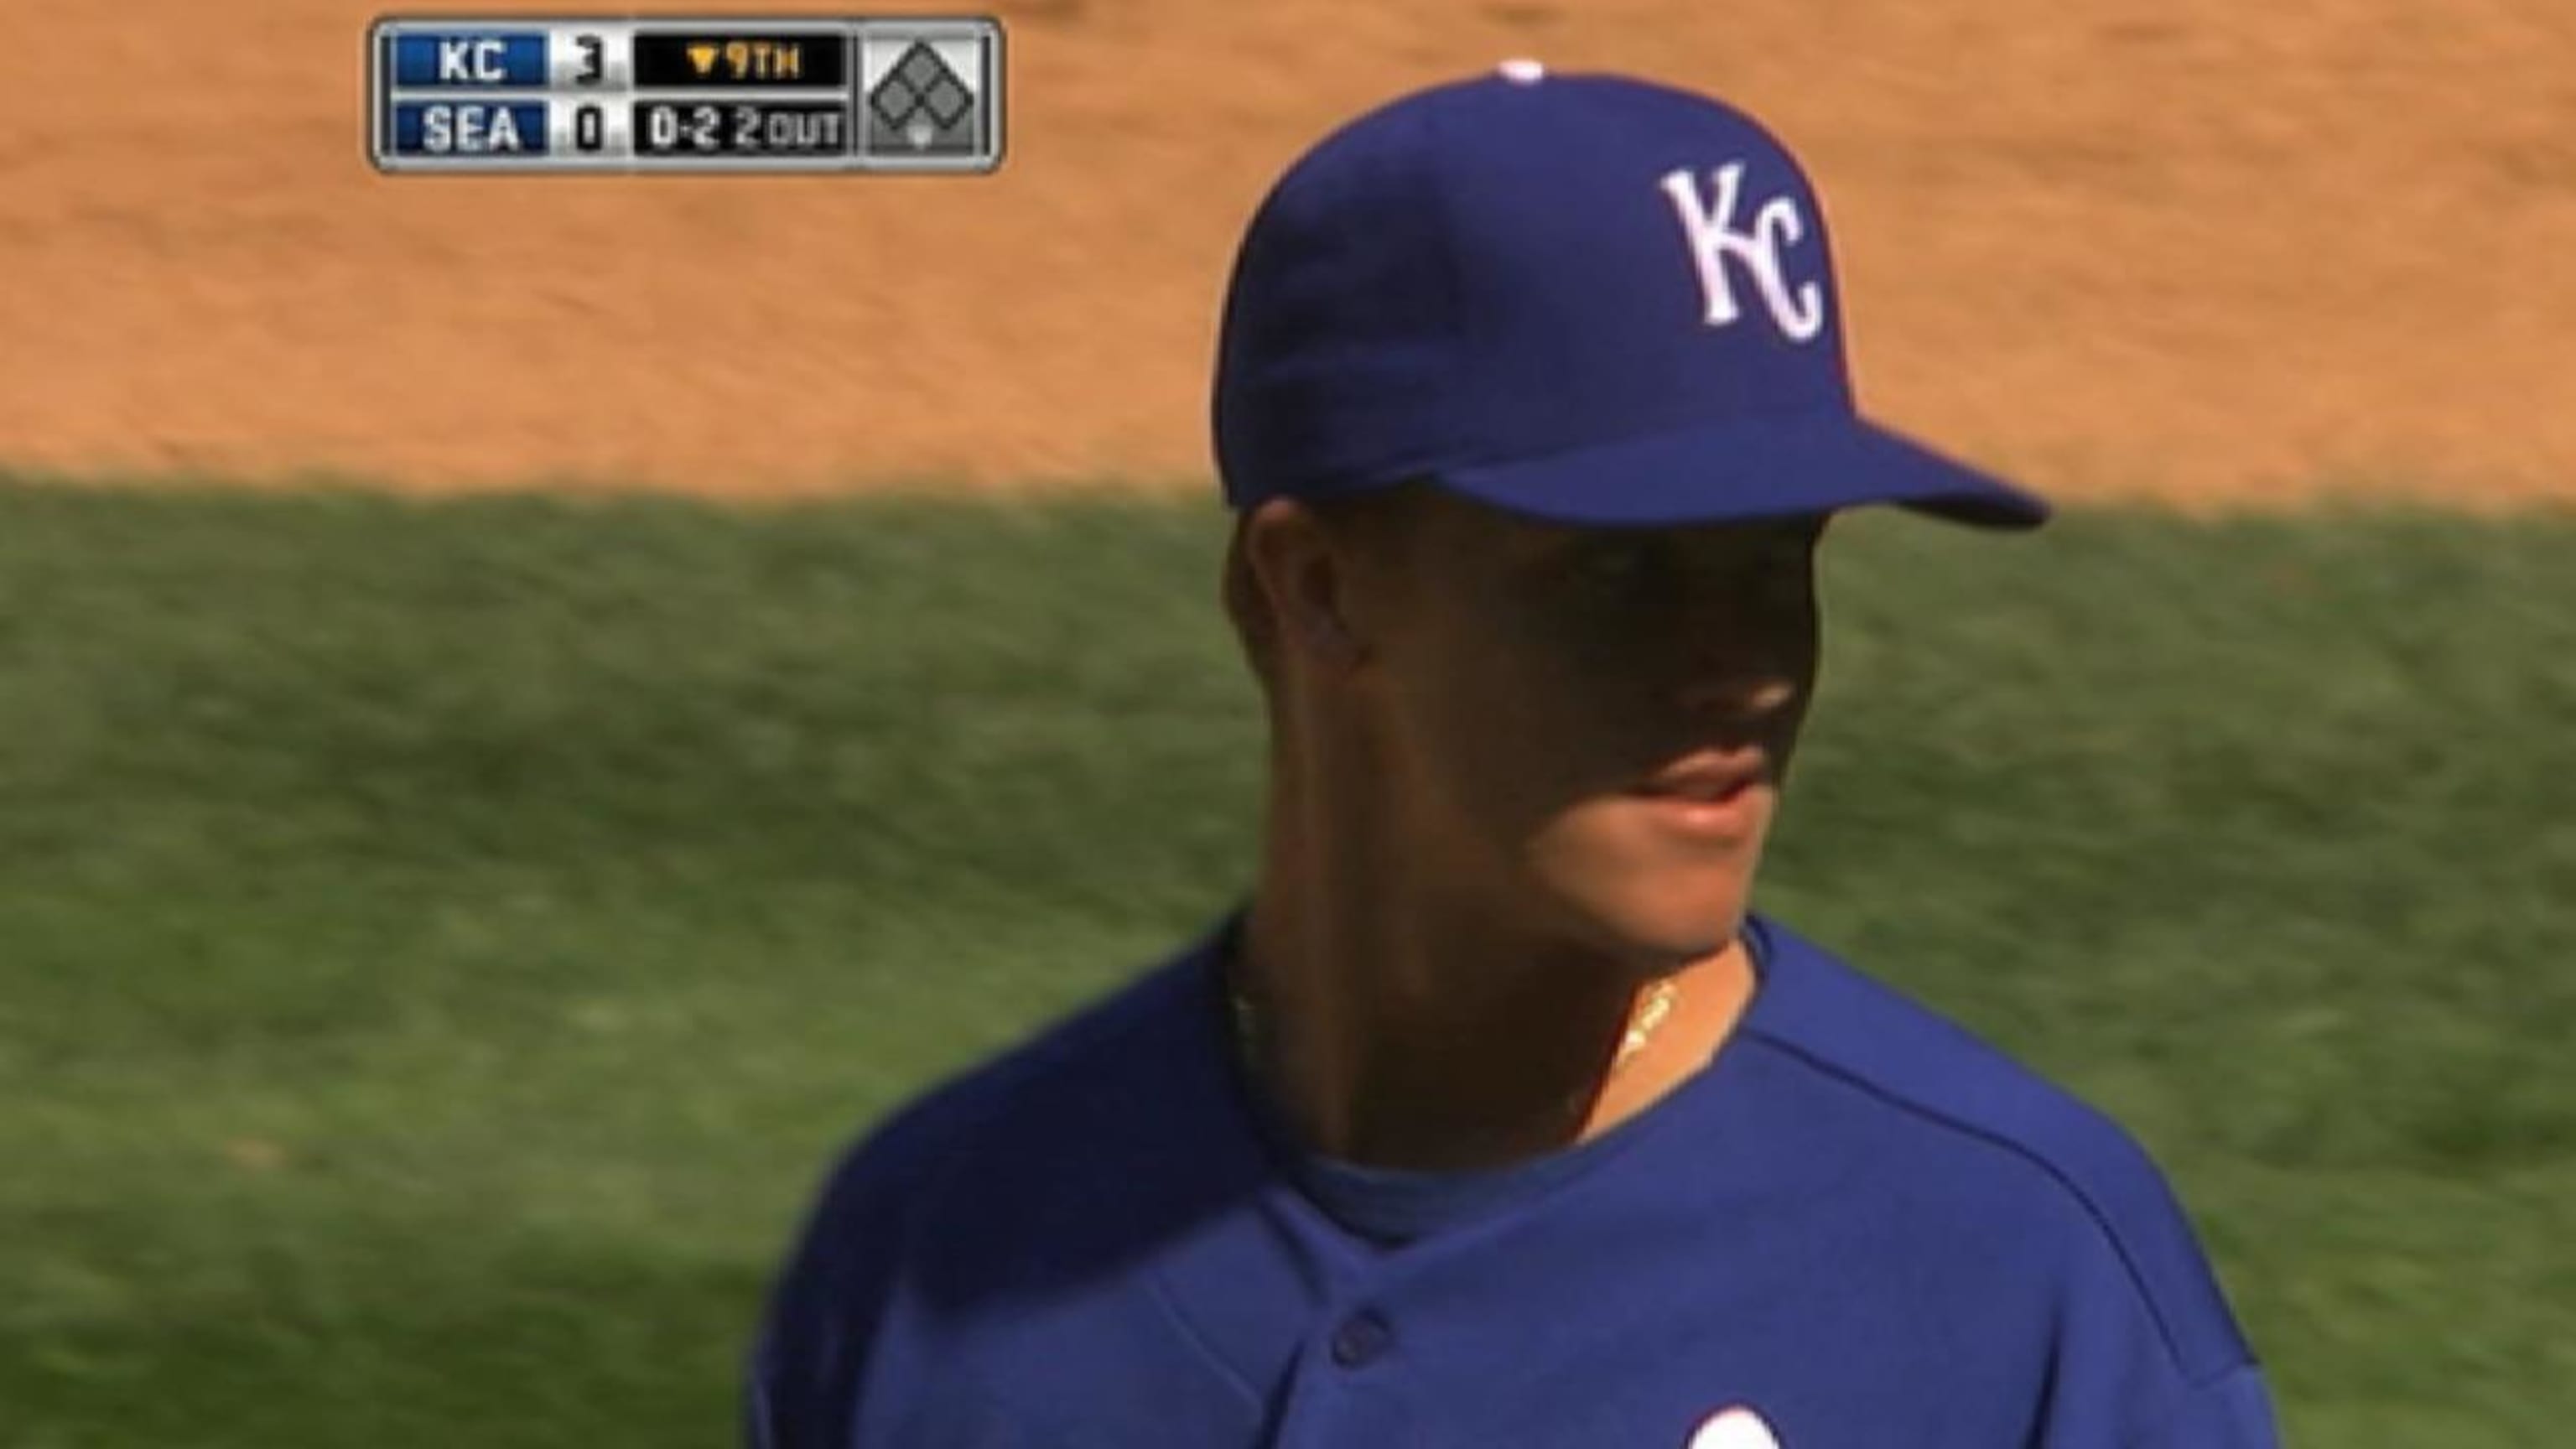 Quick-thinking Zack Greinke helped Royals get an out in manner rarely seen  in baseball